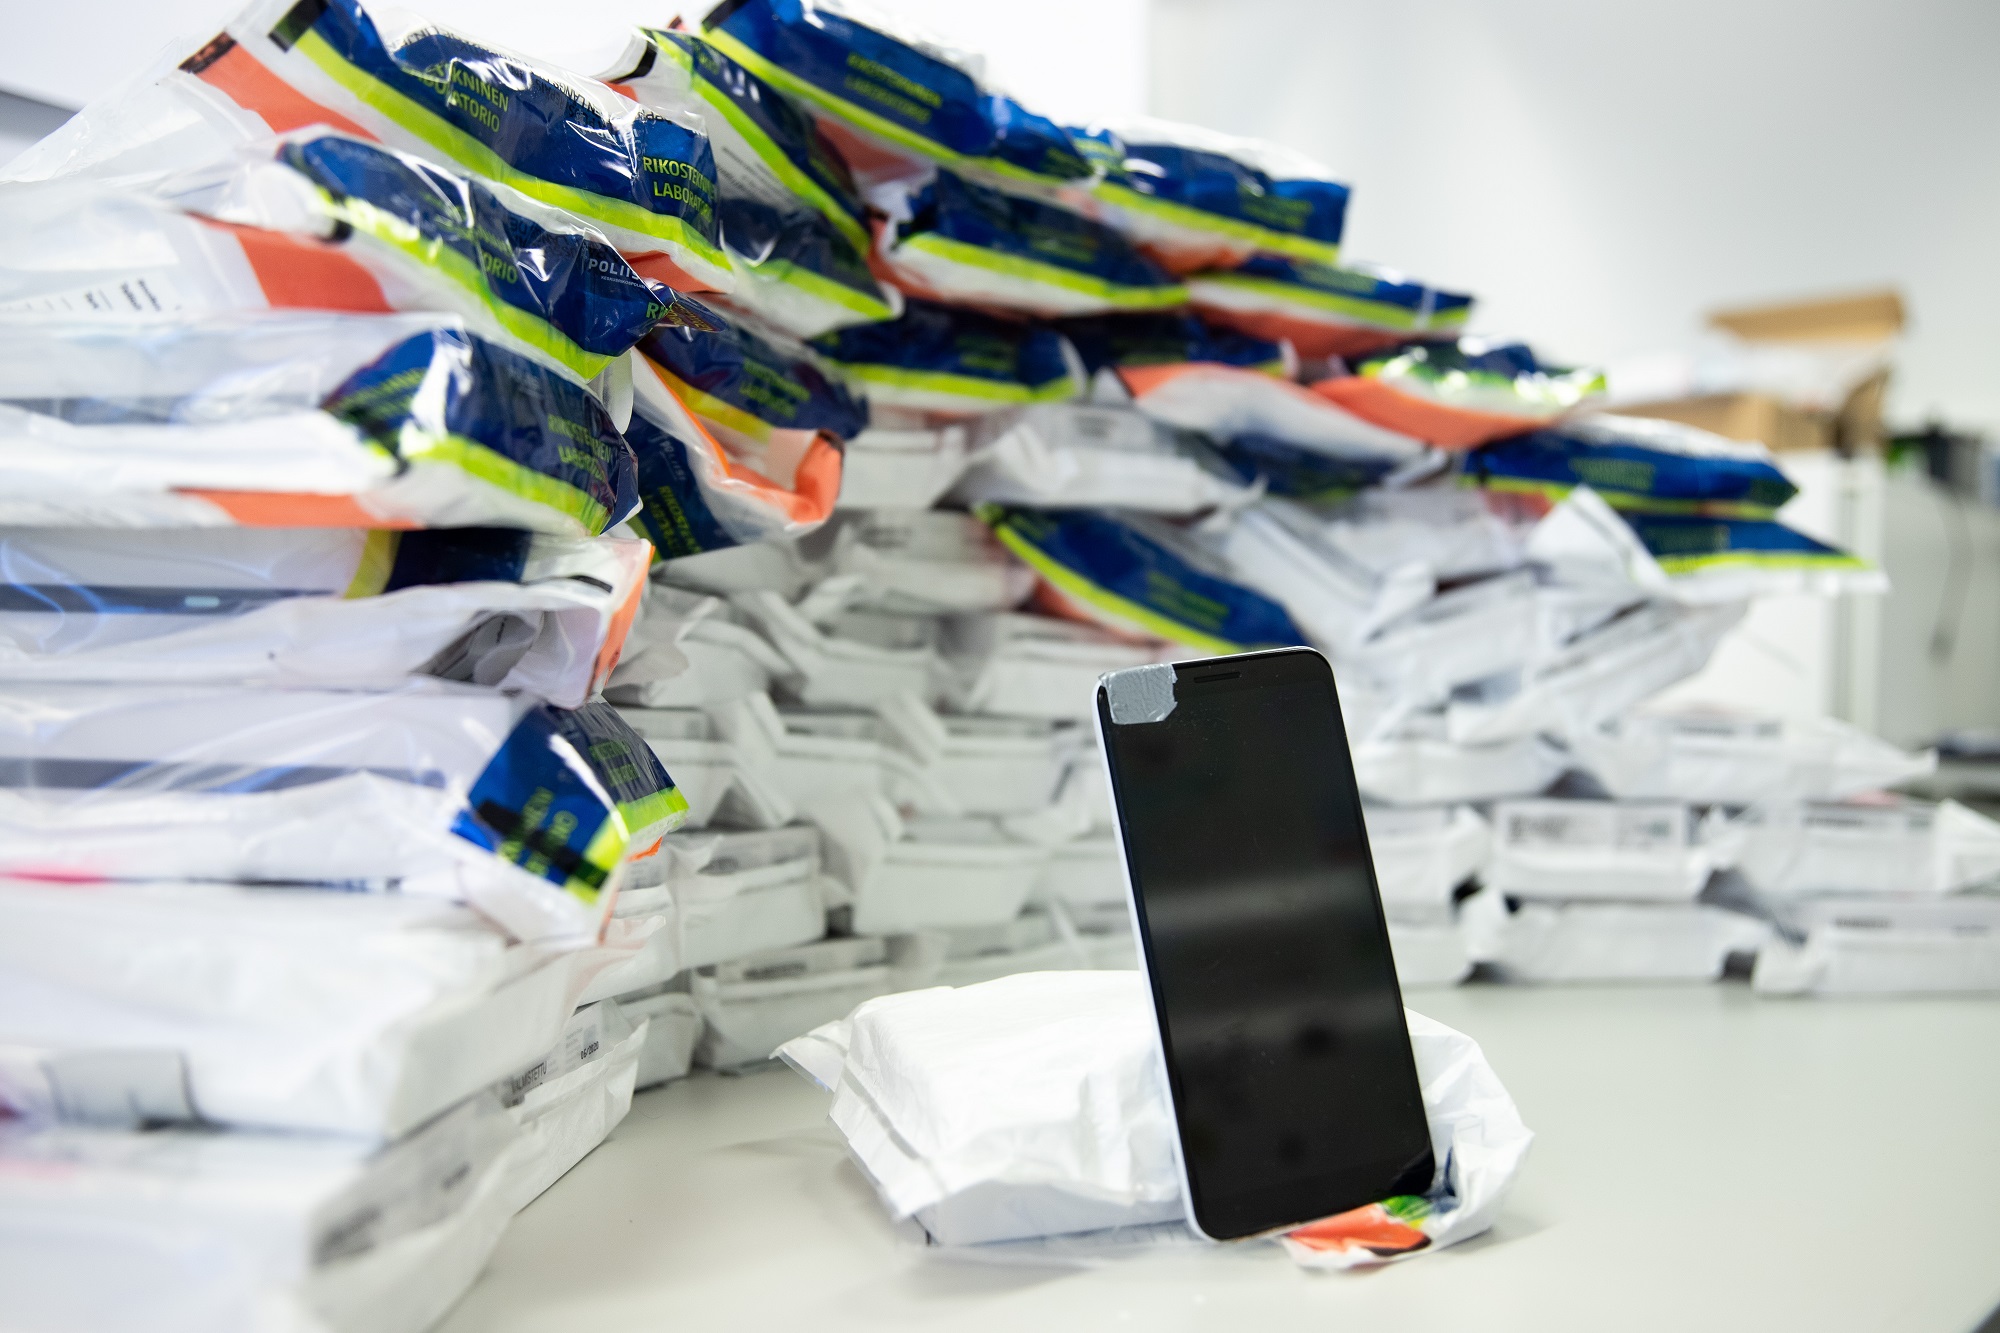 Alt: Phones seized by the police in sample bags bearing the name Forensic Laboratory.